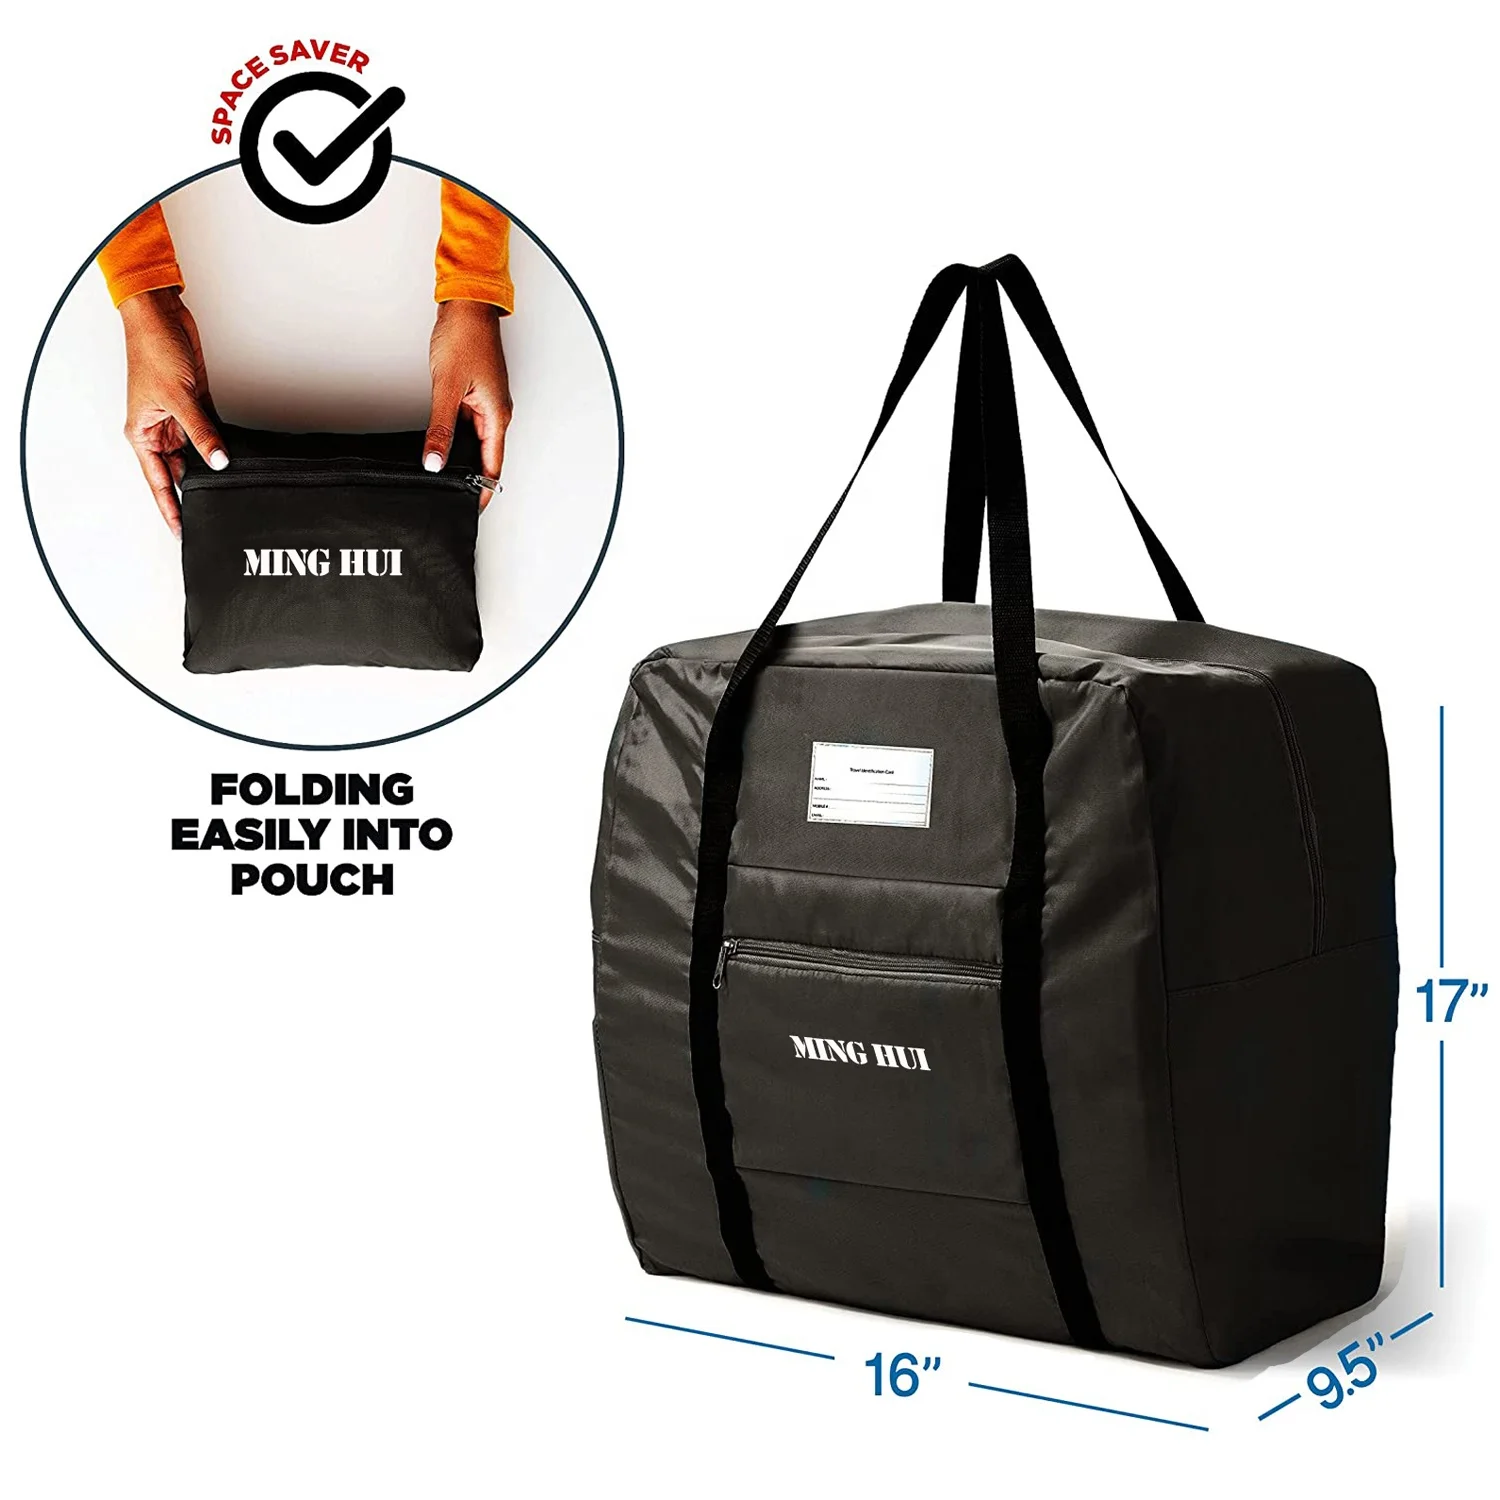 Booster Seat Bag for Airplane Travel for Backless Booster Seat | Booster Seat